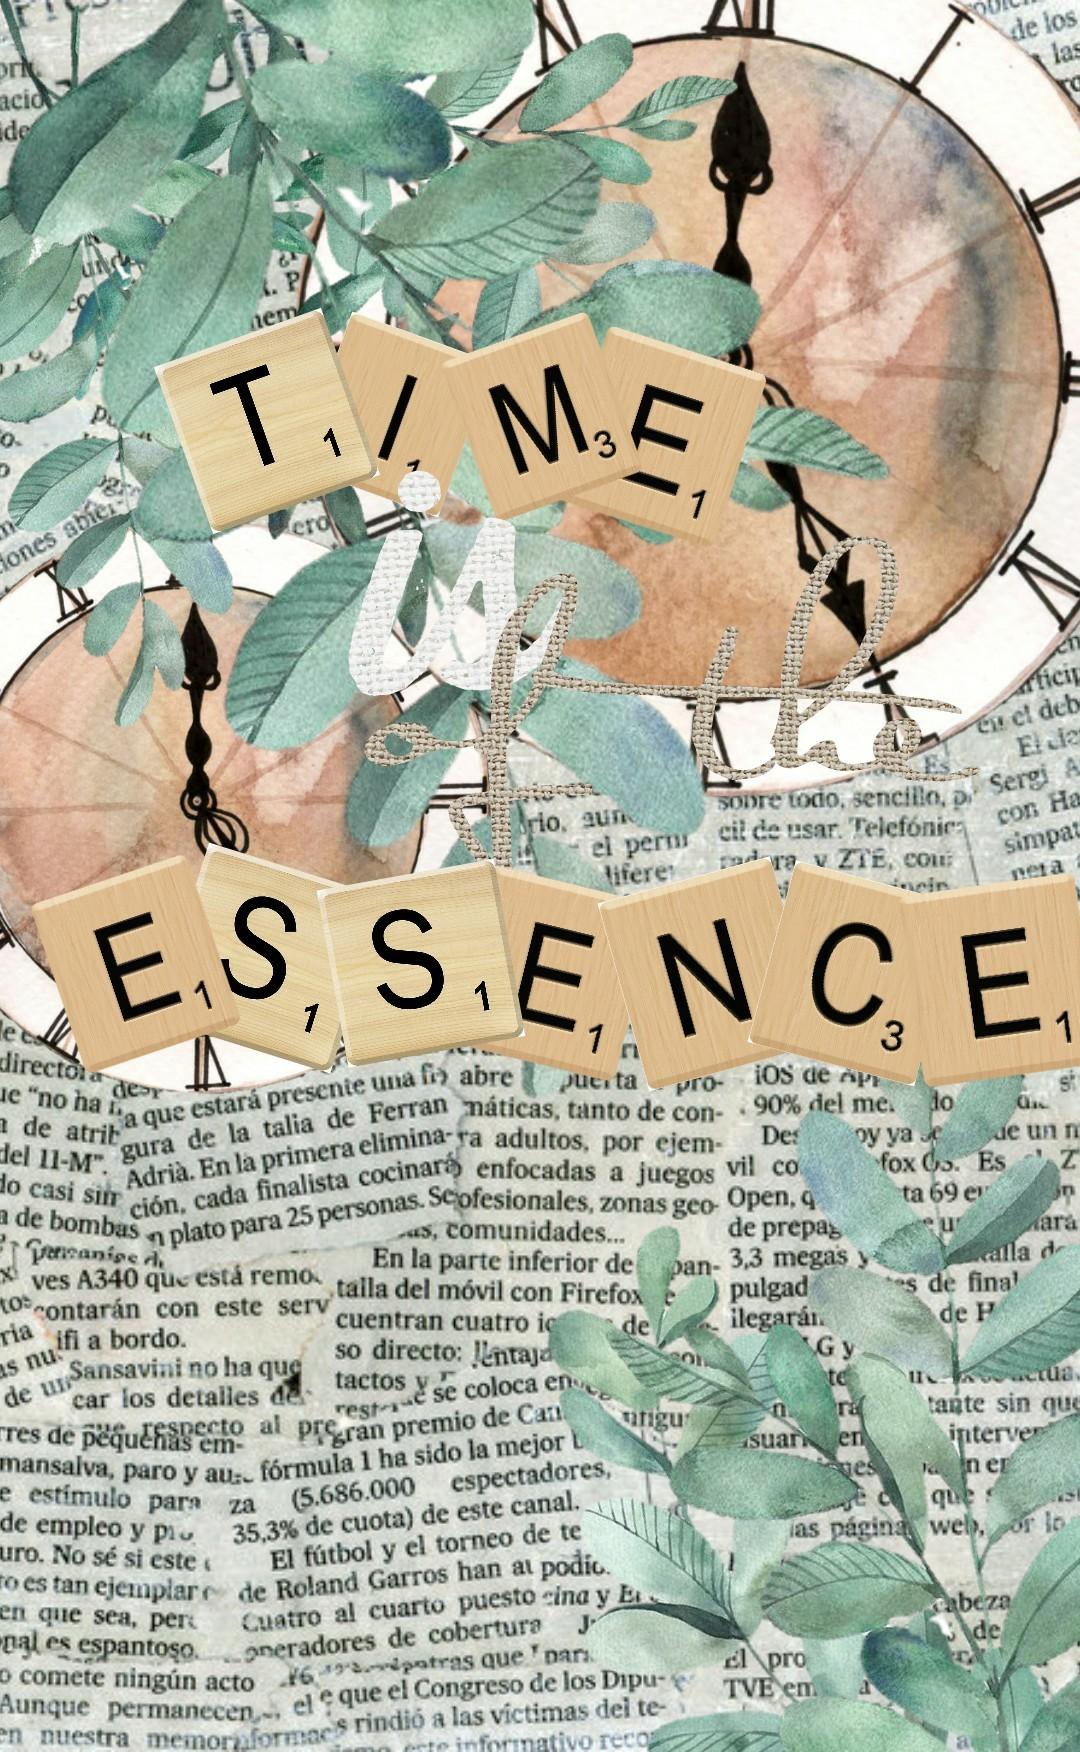 ⌚⏰ Tap ⏰

"Time is of the essence"
-Alice in Wonderland